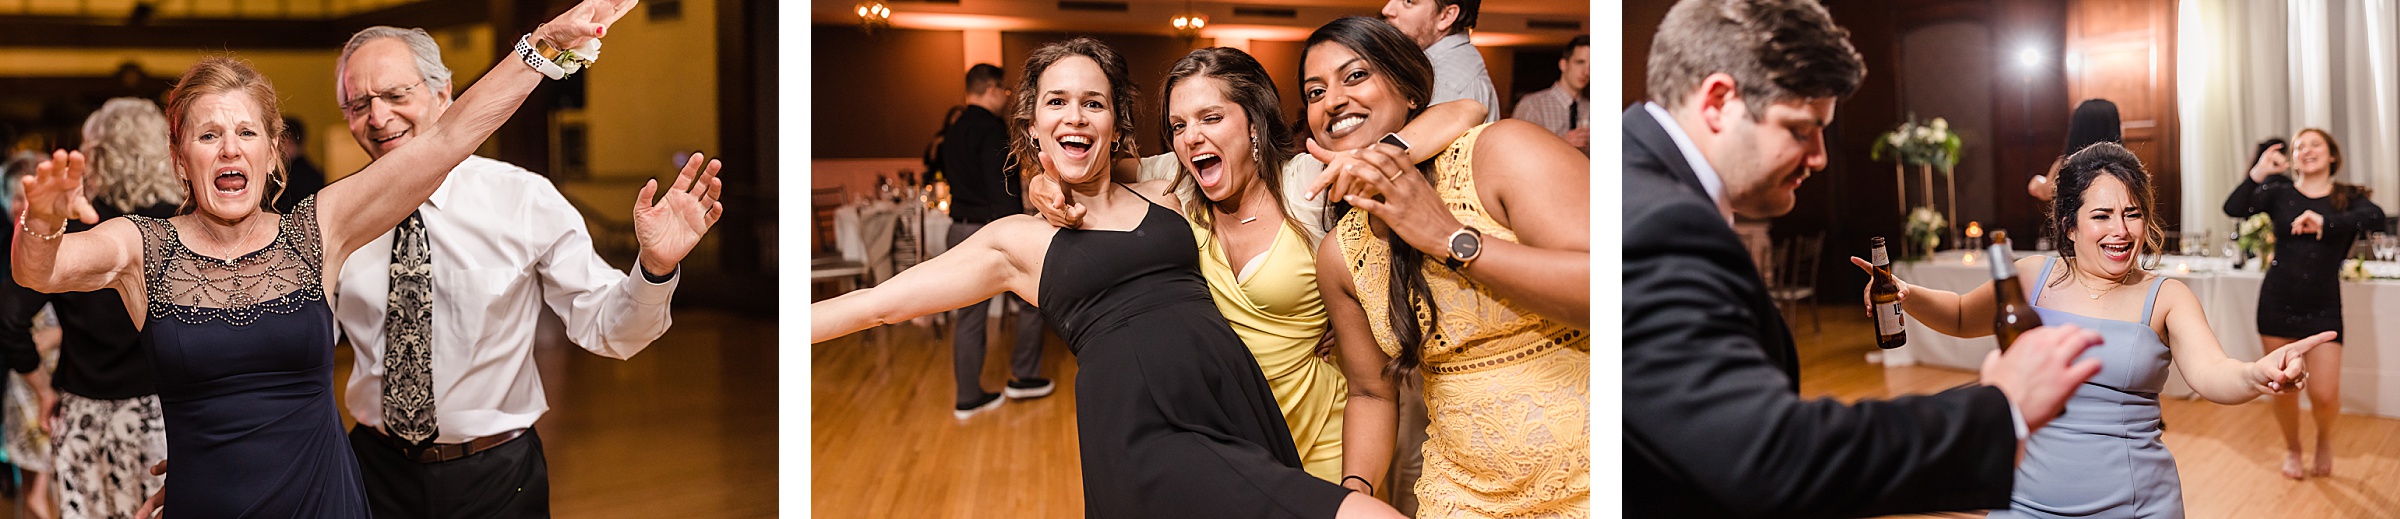 Friends and family party during a wedding at the Chevy Chase Country Club in Wheeling, Illinois.